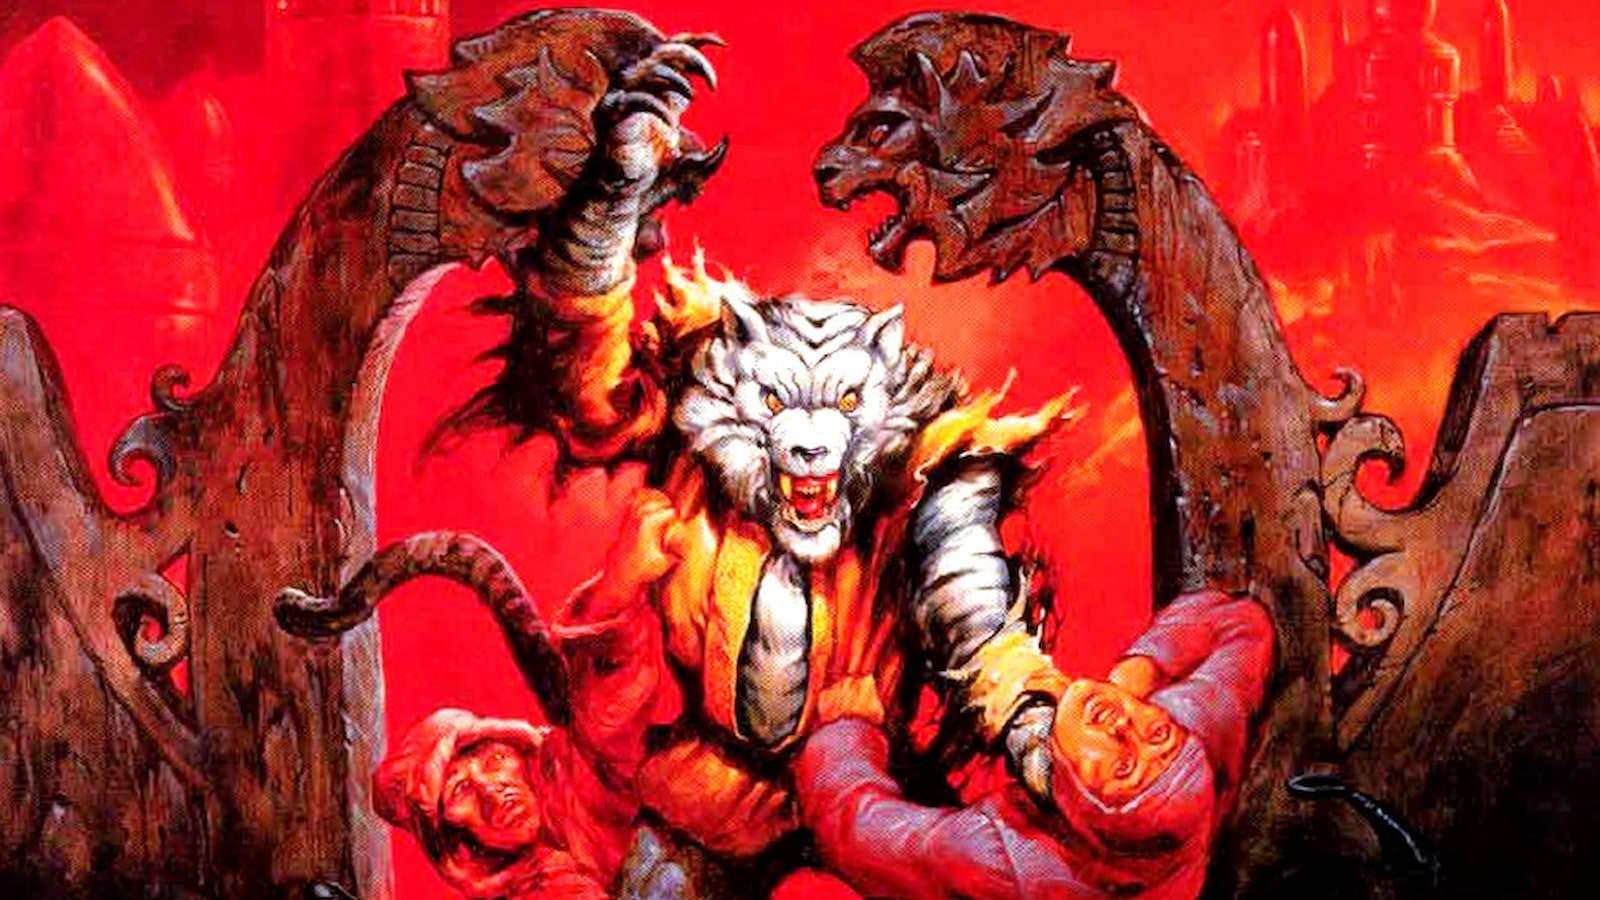 The Star of Kolhapur cover art for Advanced Dungeons & Dragons